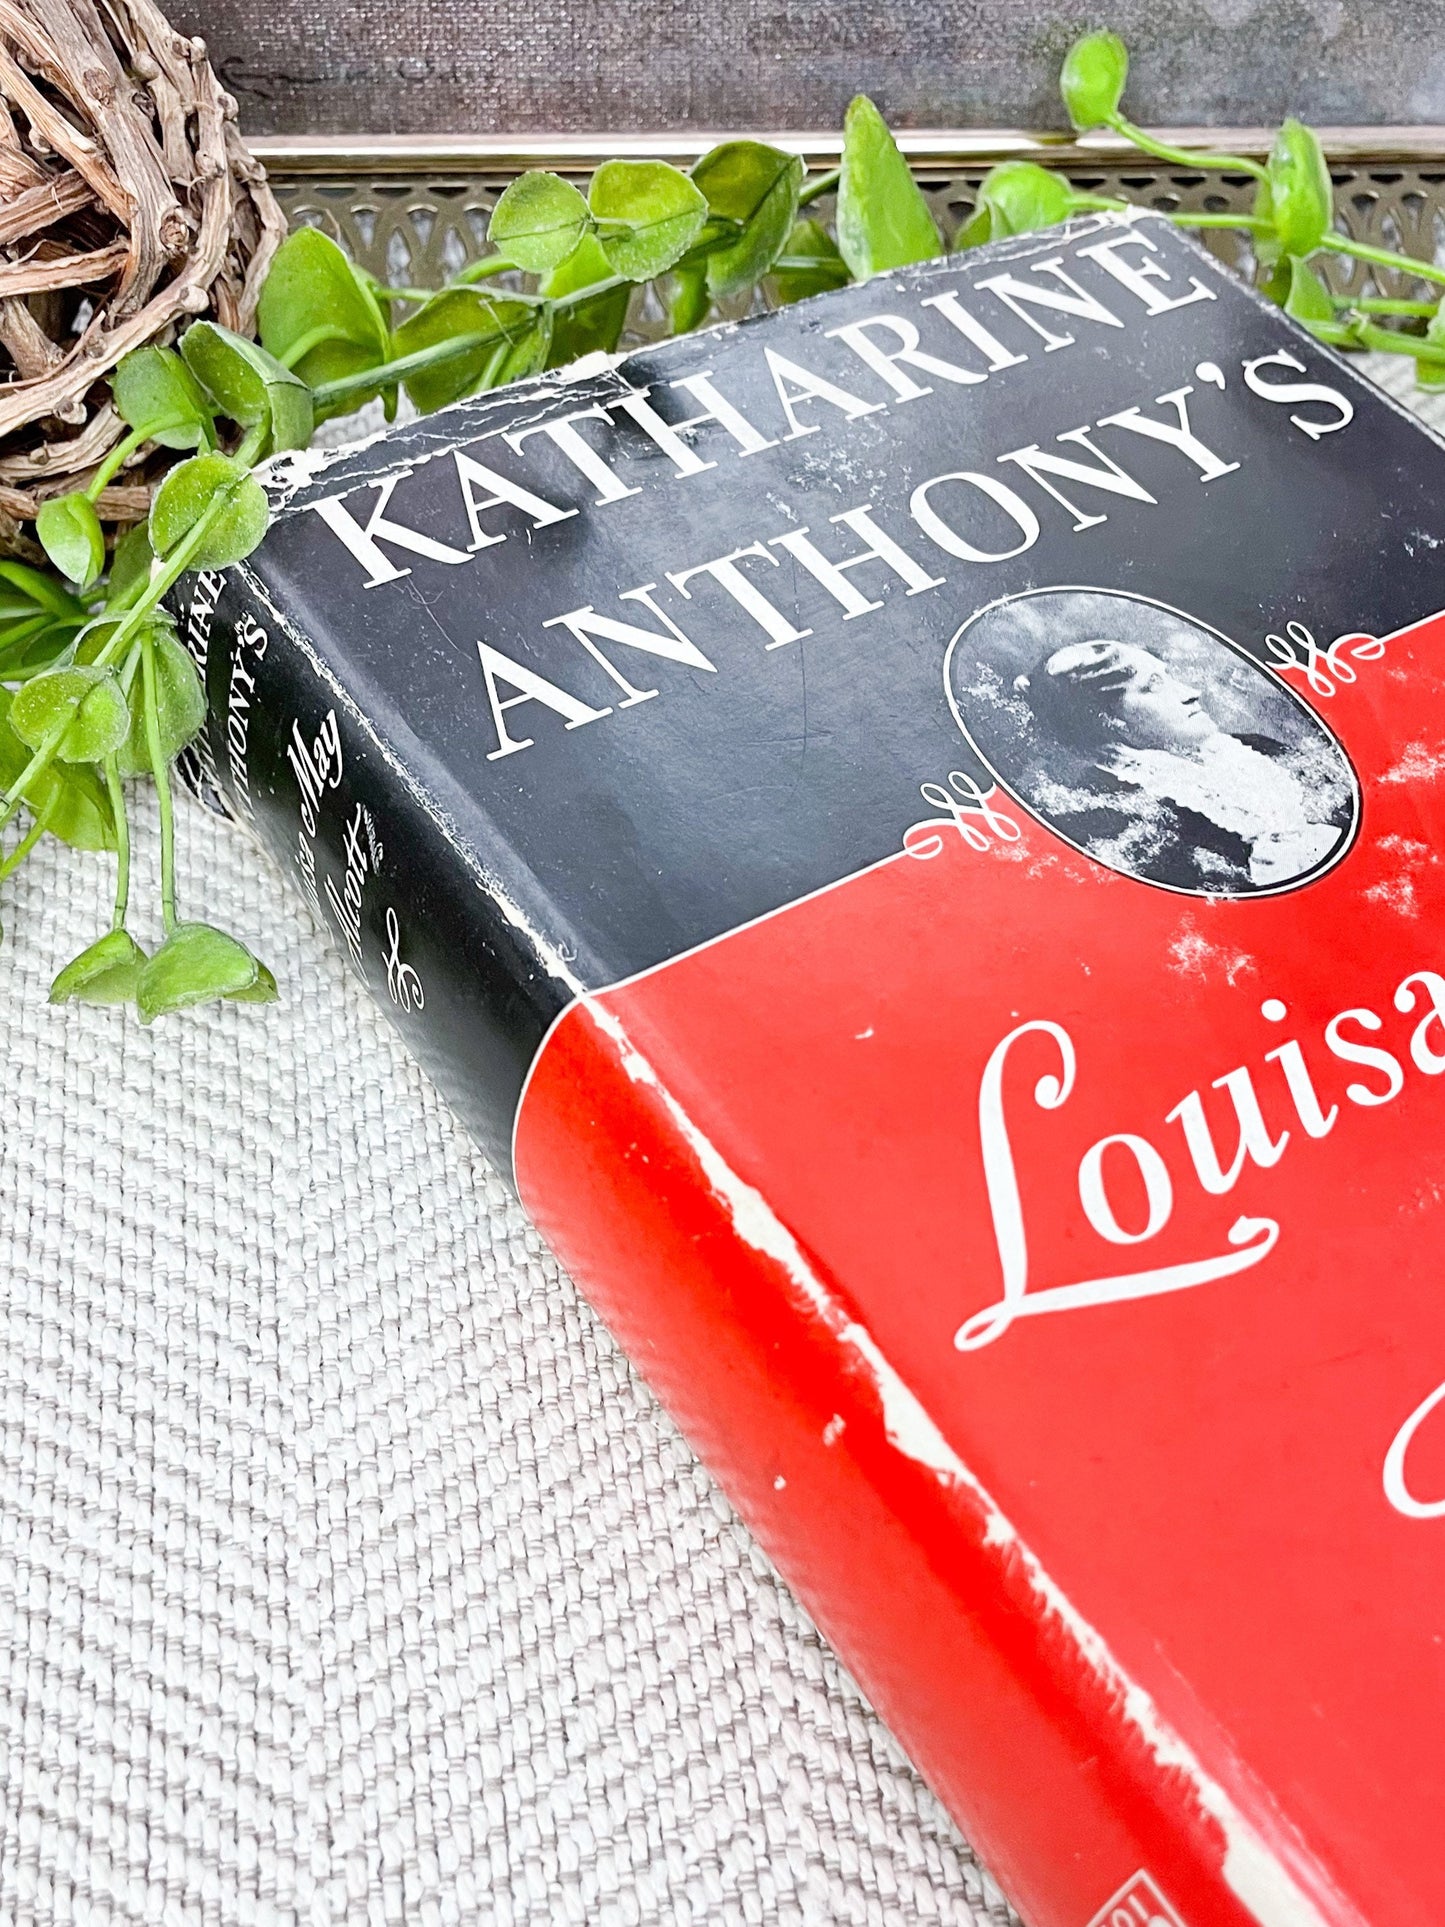 Antique Book, Biography about Louisa May Alcott, Louisa May Alcott by Katharine Anthony